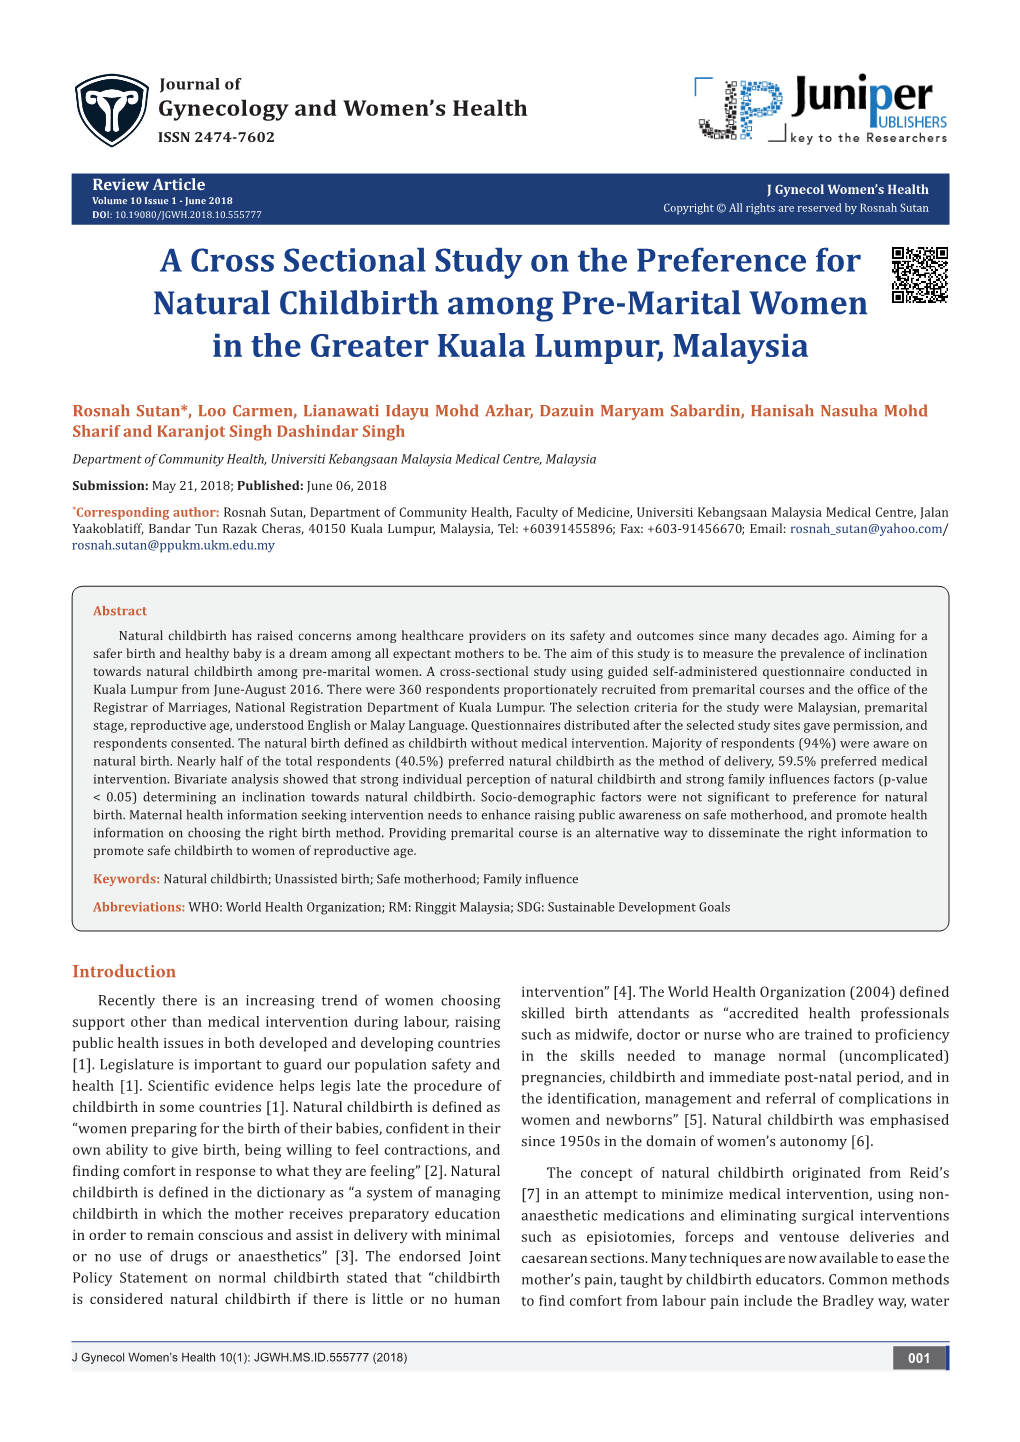 A Cross Sectional Study on the Preference for Natural Childbirth Among Pre-Marital Women in the Greater Kuala Lumpur, Malaysia